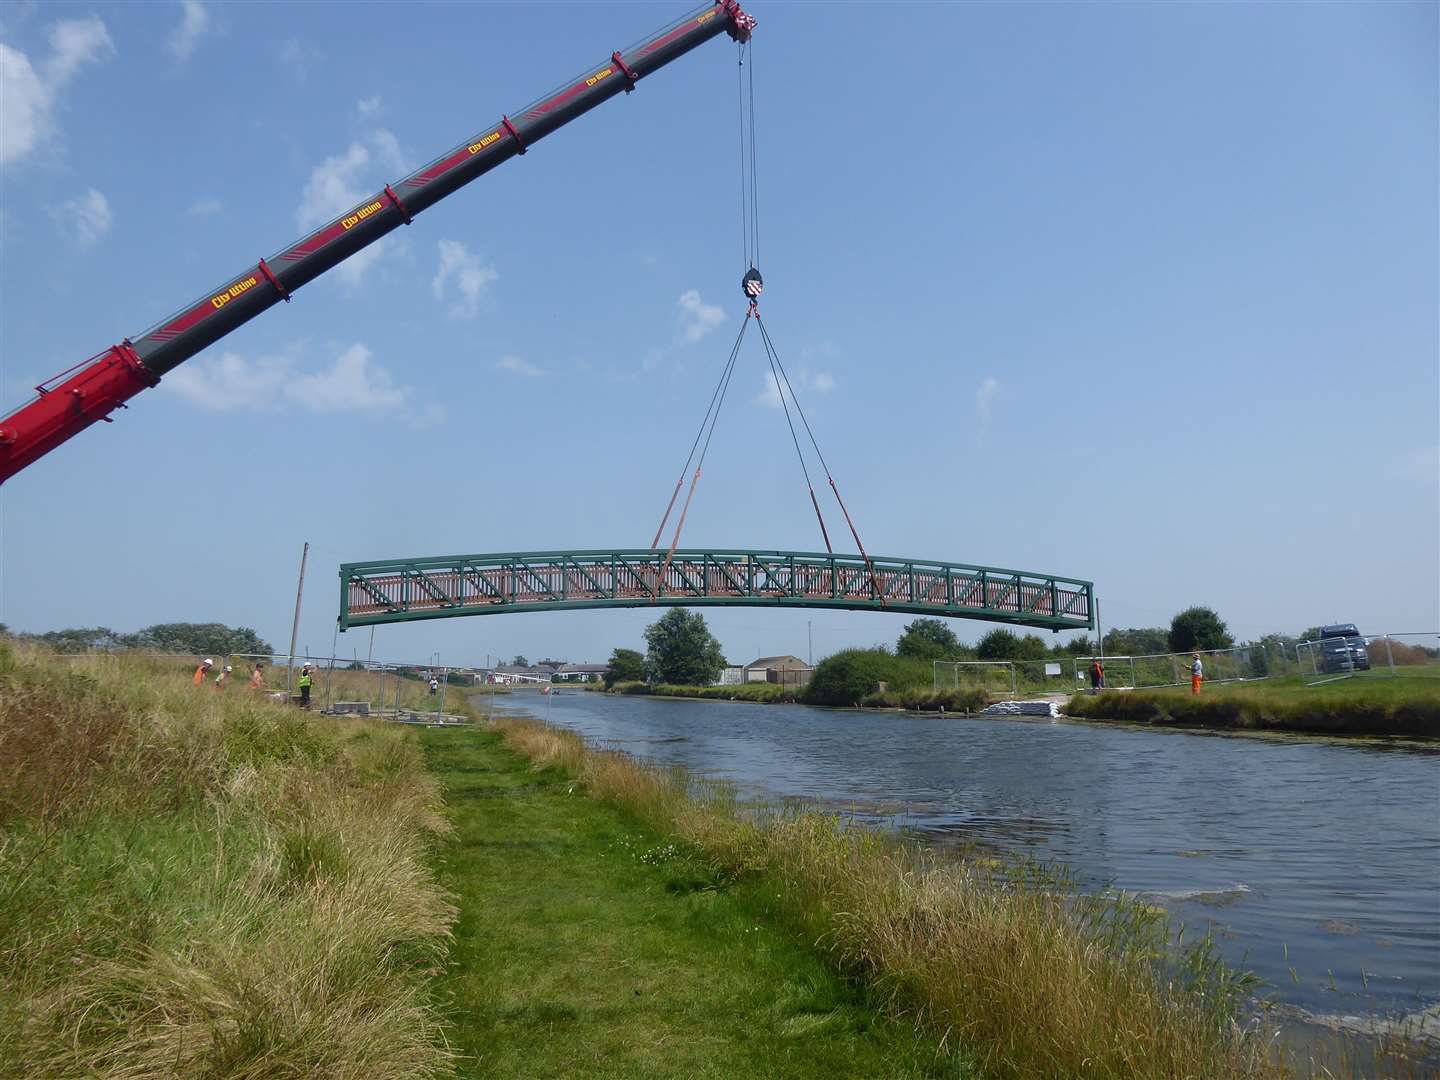 The new £105,000 metal footbridge is gently lowered into position at Barton's Point Coastal Park, Sheerness, Sheppey. Picture: Chris Reed